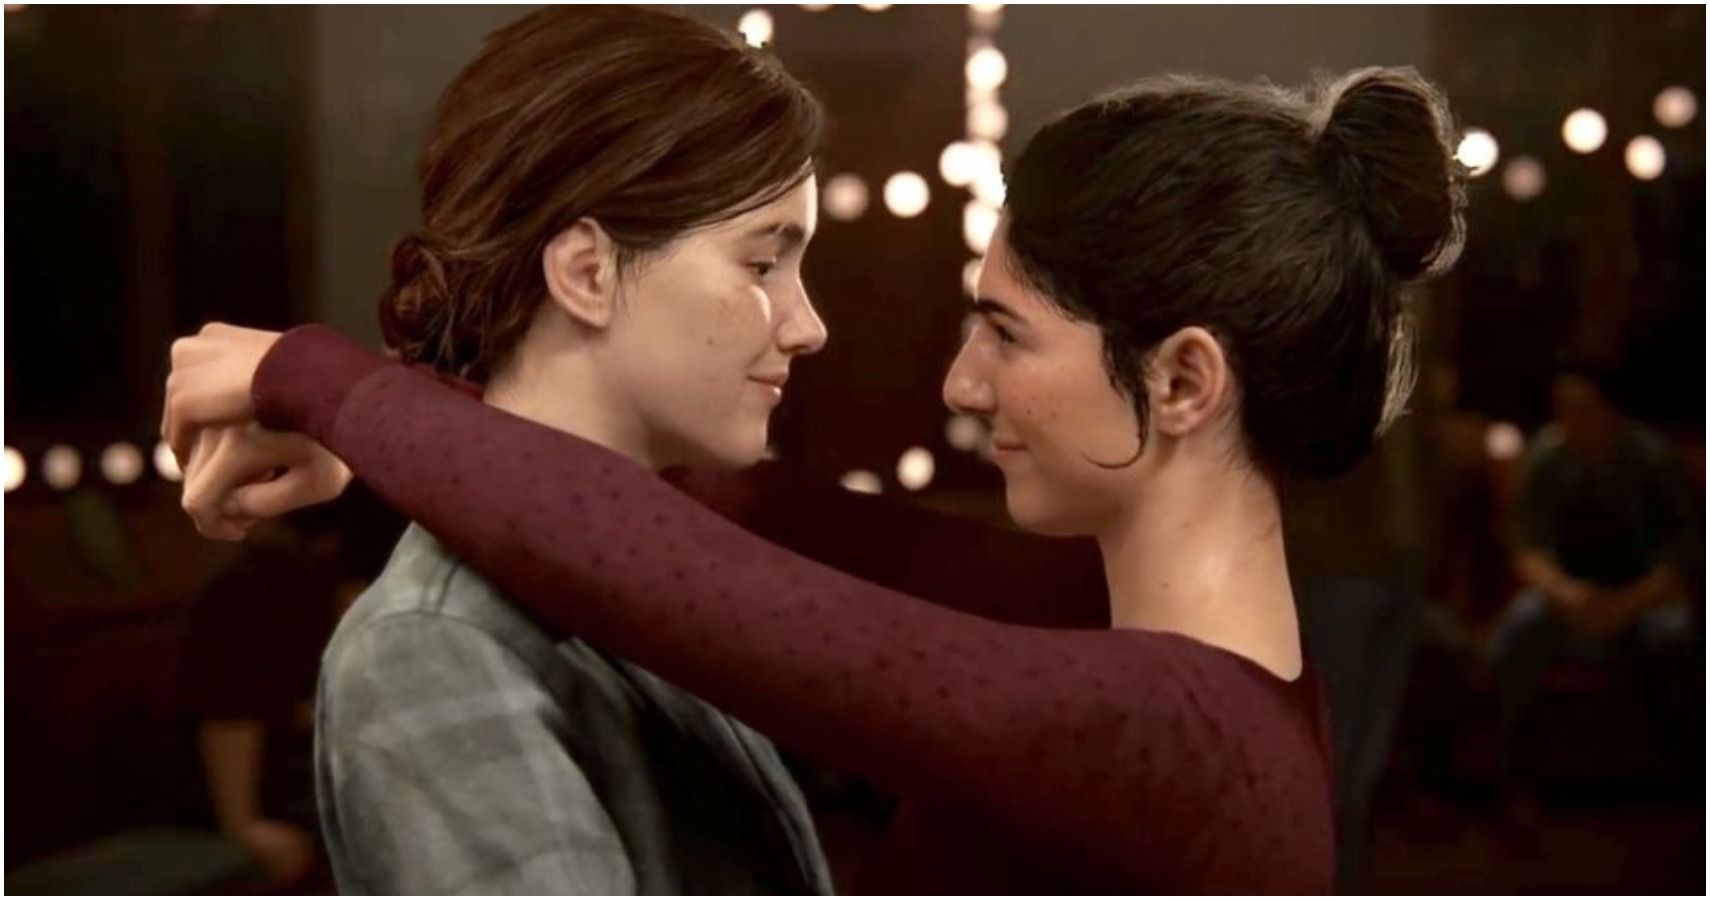 The Last Of Us 2: 10 Important Details You Didn't Know About Ellie